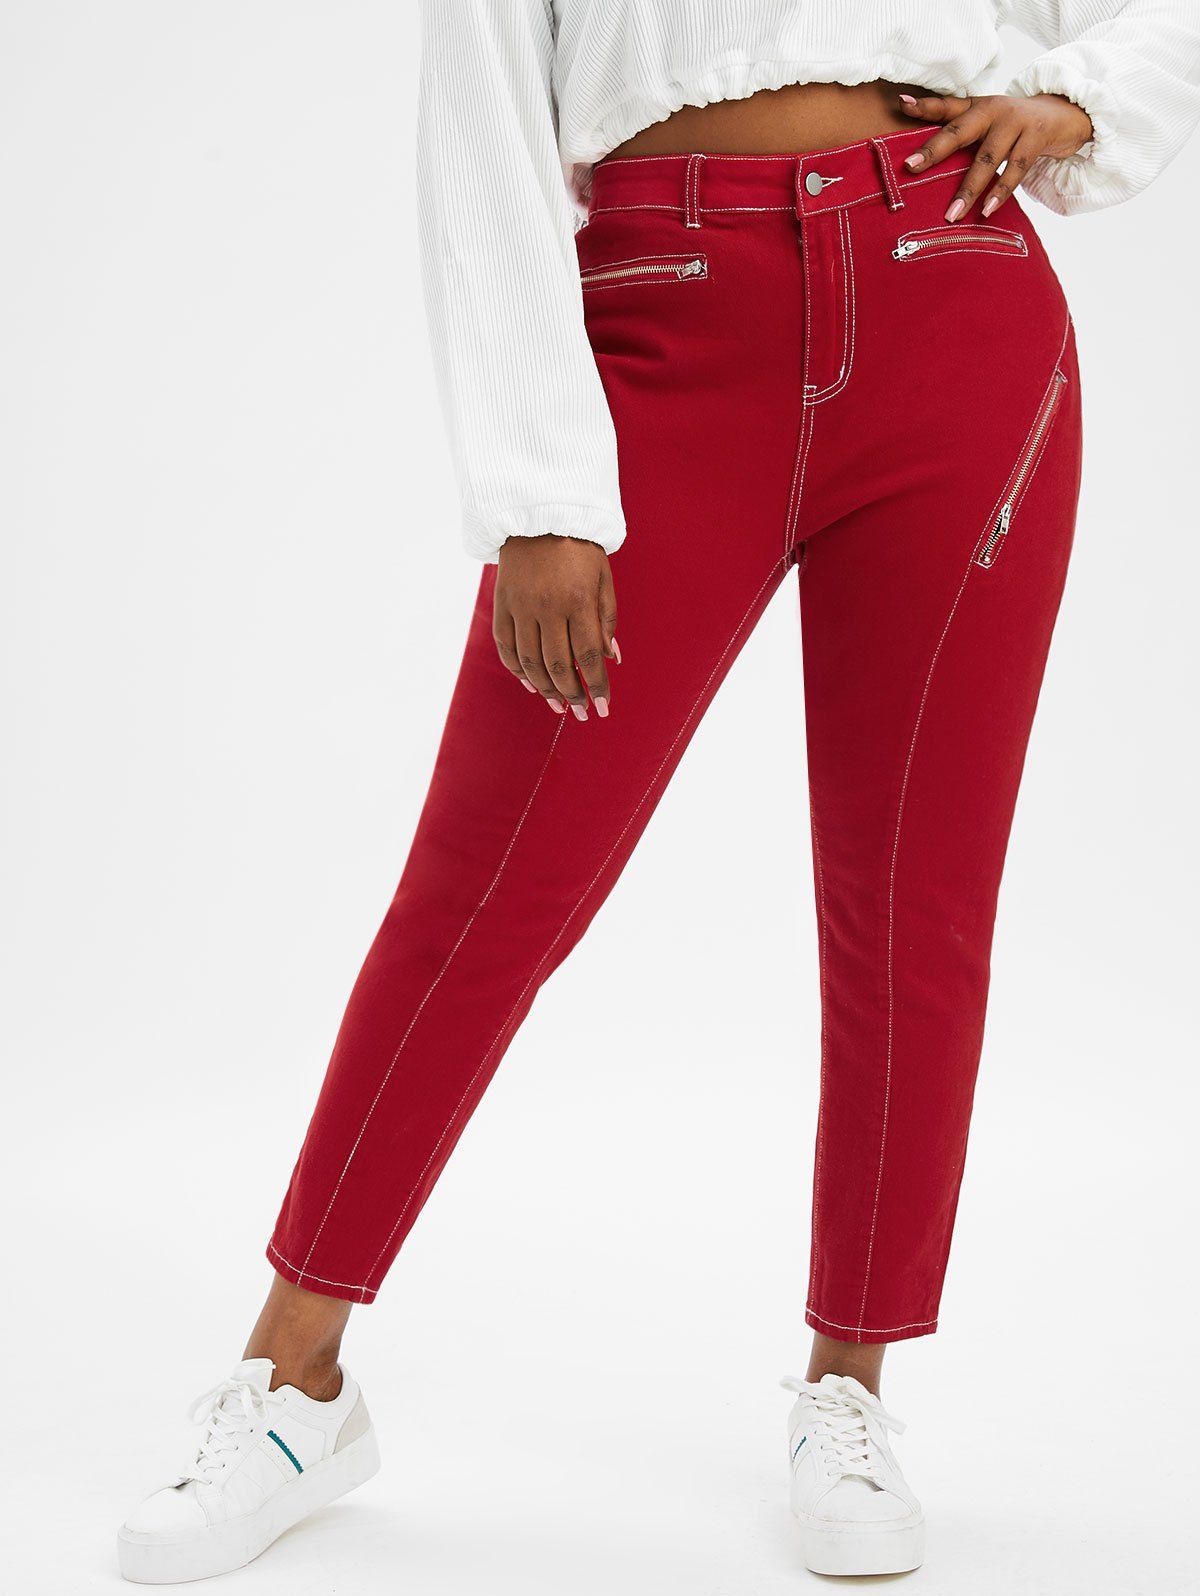 Latest Topstitching Zippered Front Plus Size Colored Jeans  